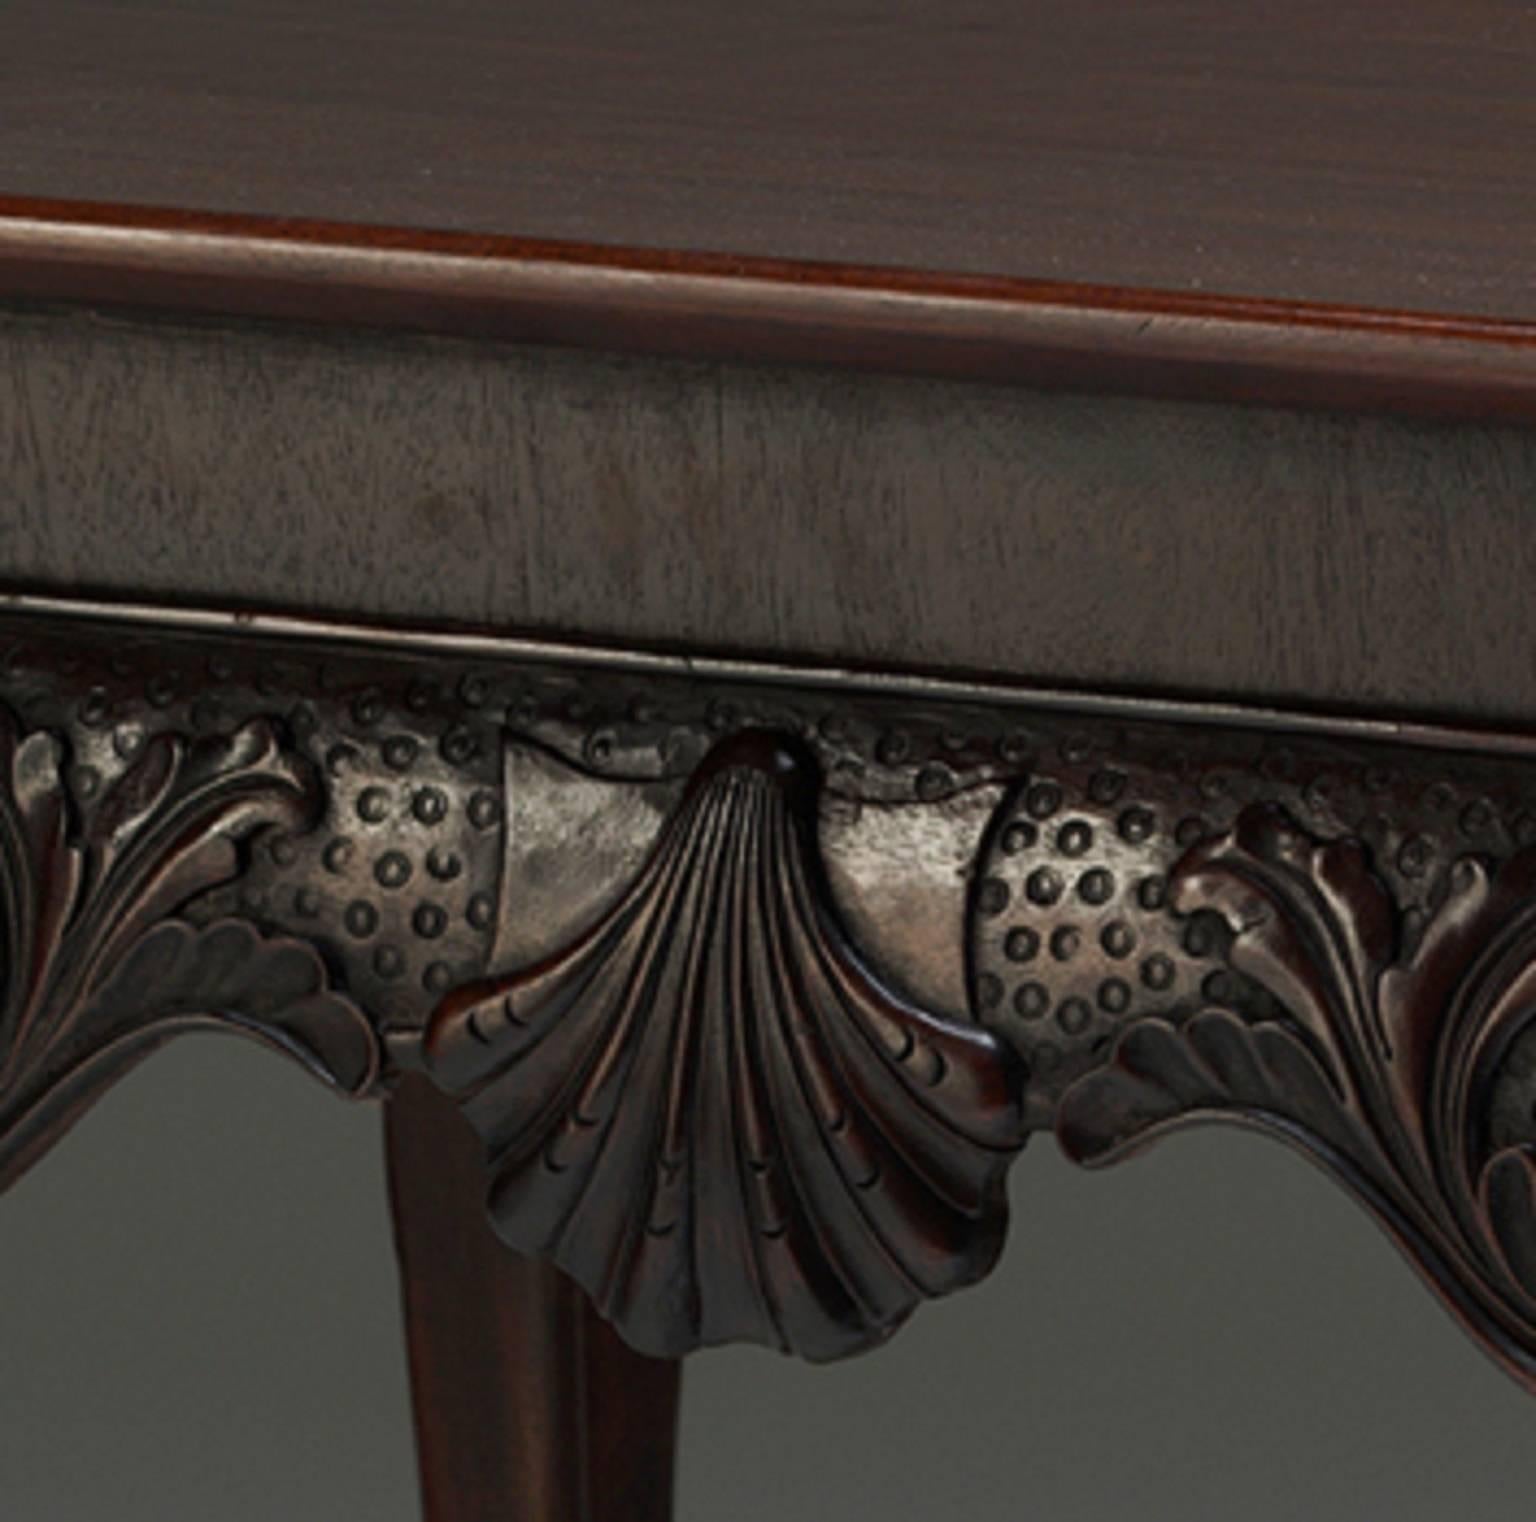 Hand-Crafted Irish Silver Table For Sale